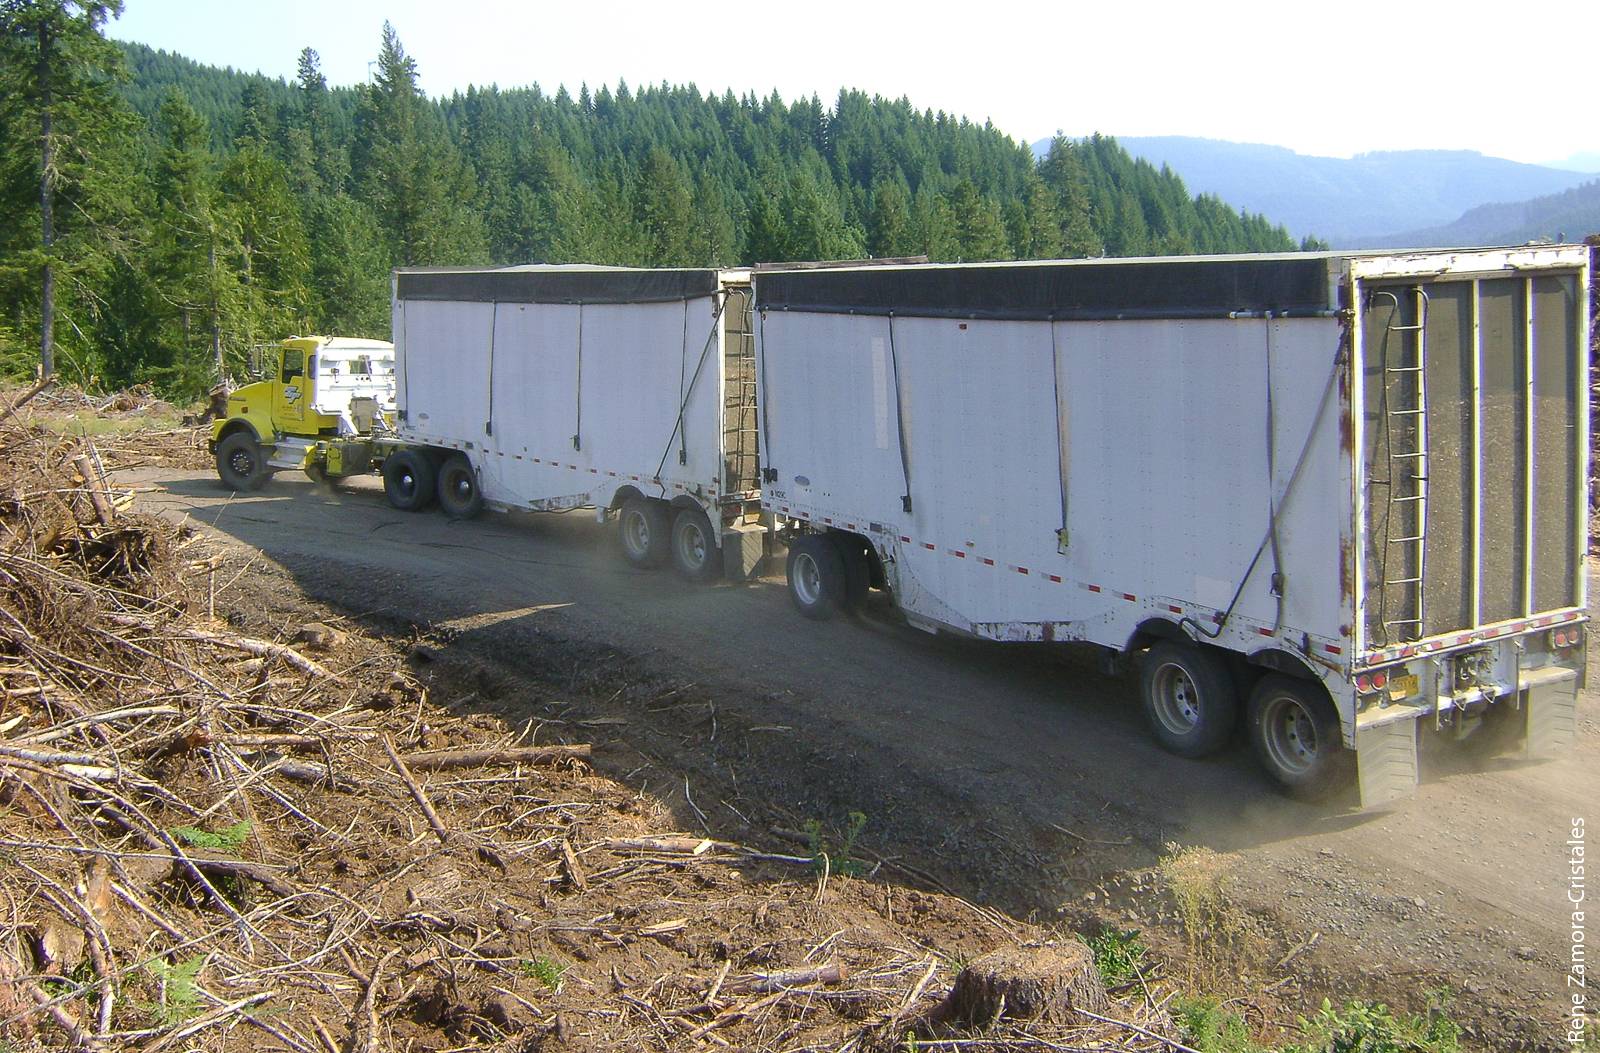 A double-trailer configuration traveling on a forest road near Roseburg, Oregon. In Washington and Oregon, double trailers can be more cost effective than single trailers for transporting forest biomass, but they are not competitive in California due to restrictions on load weight and trailer length.